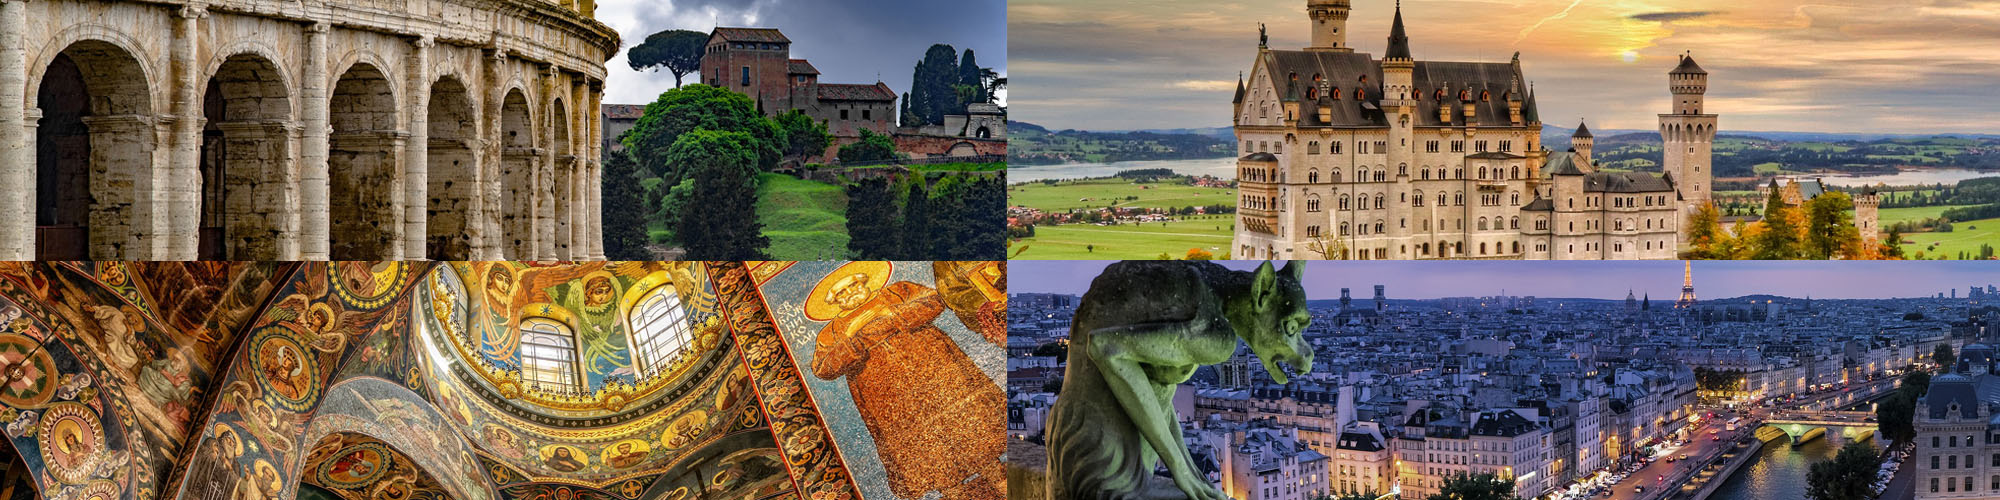 top left: Colosseum, Italy; top right: Neuschwanstein castle, bottom left: ceiling of the Church of All Saints, Russia; bottom right: Paris at night